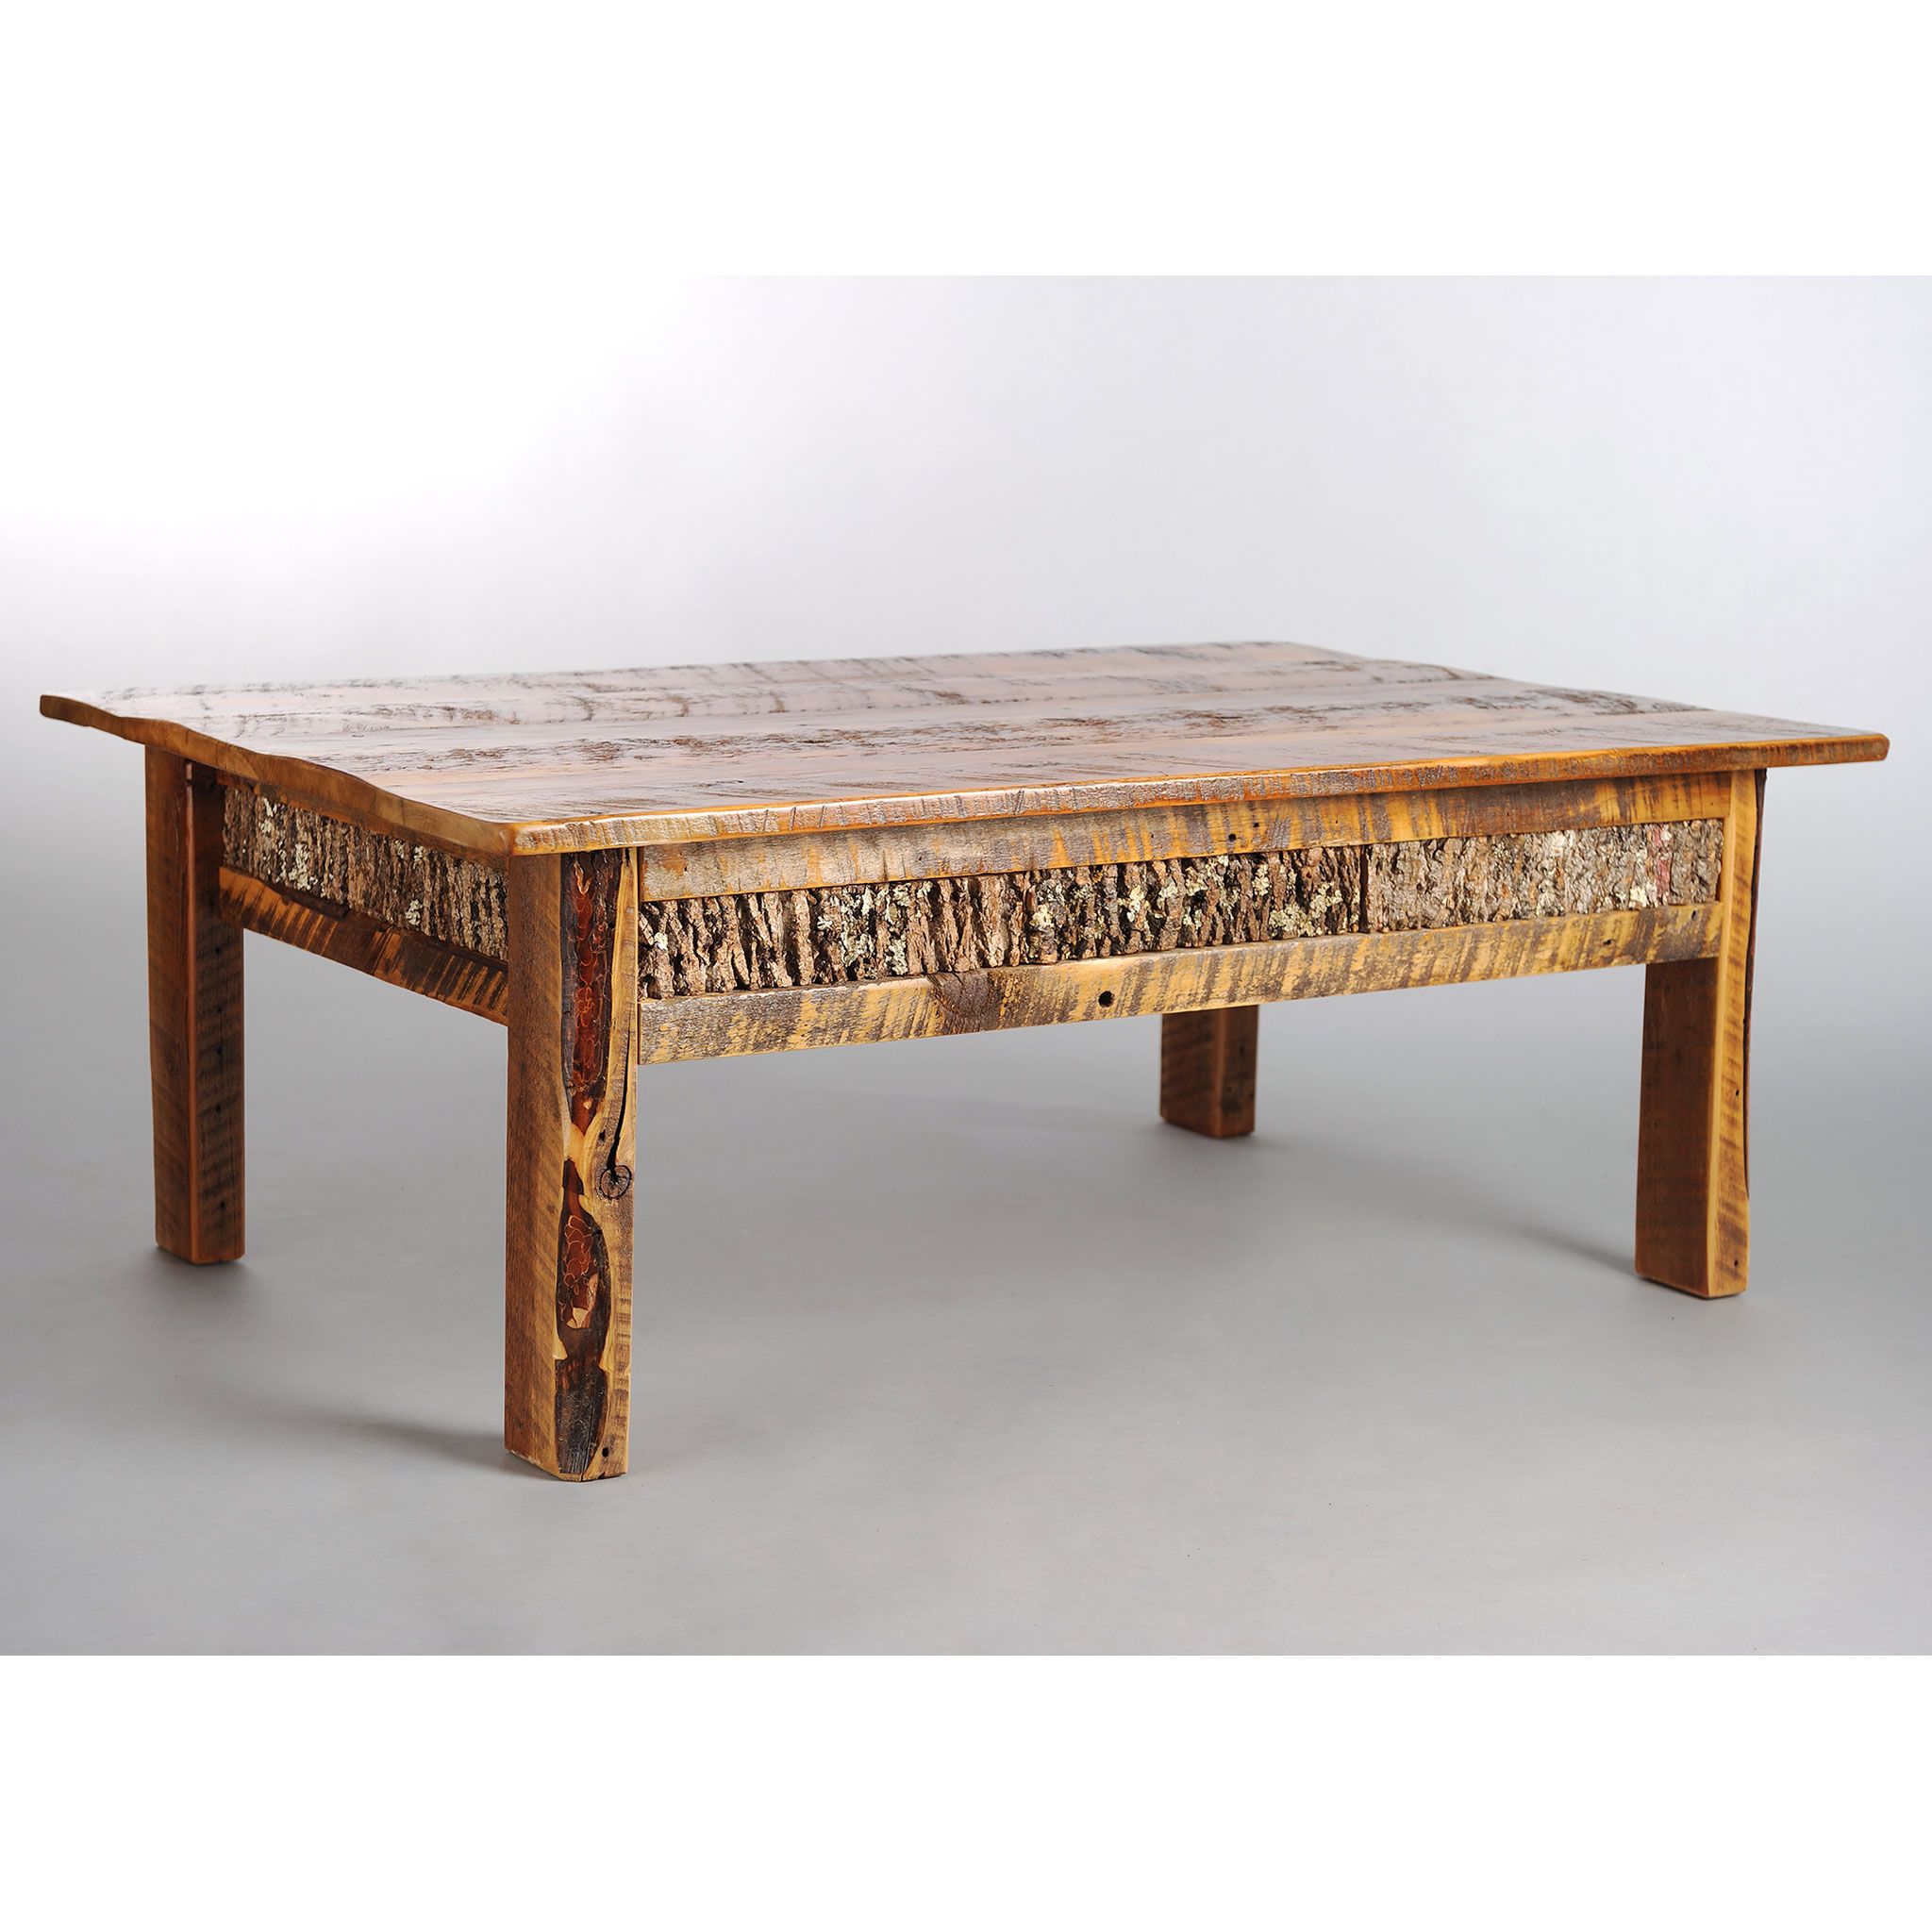 Four Corner Pertaining To Widely Used Barnwood Coffee Tables (Gallery 8 of 20)